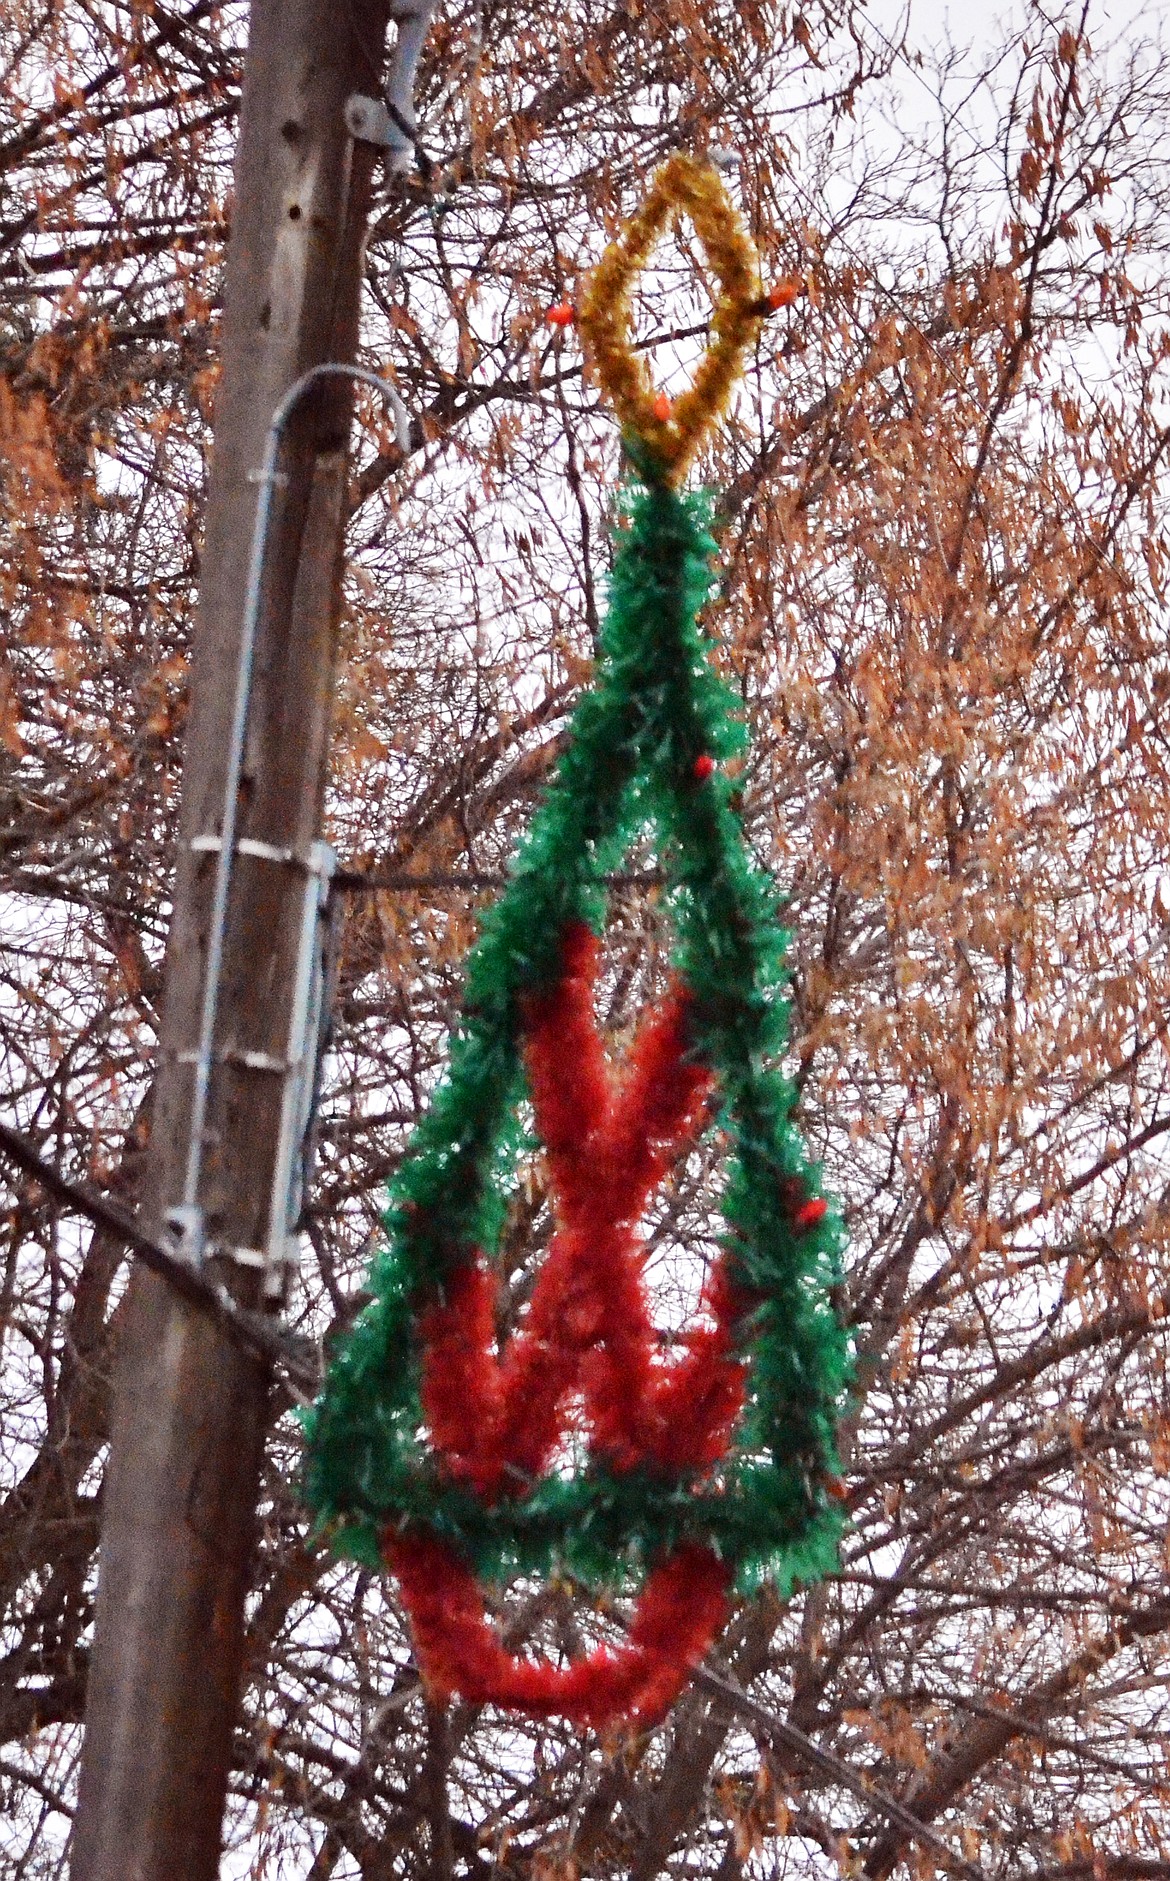 Just one of the many Christmas ornaments used to decorate the town this holiday season (Erin Jusseaume/ Clark Fork Valley Press)